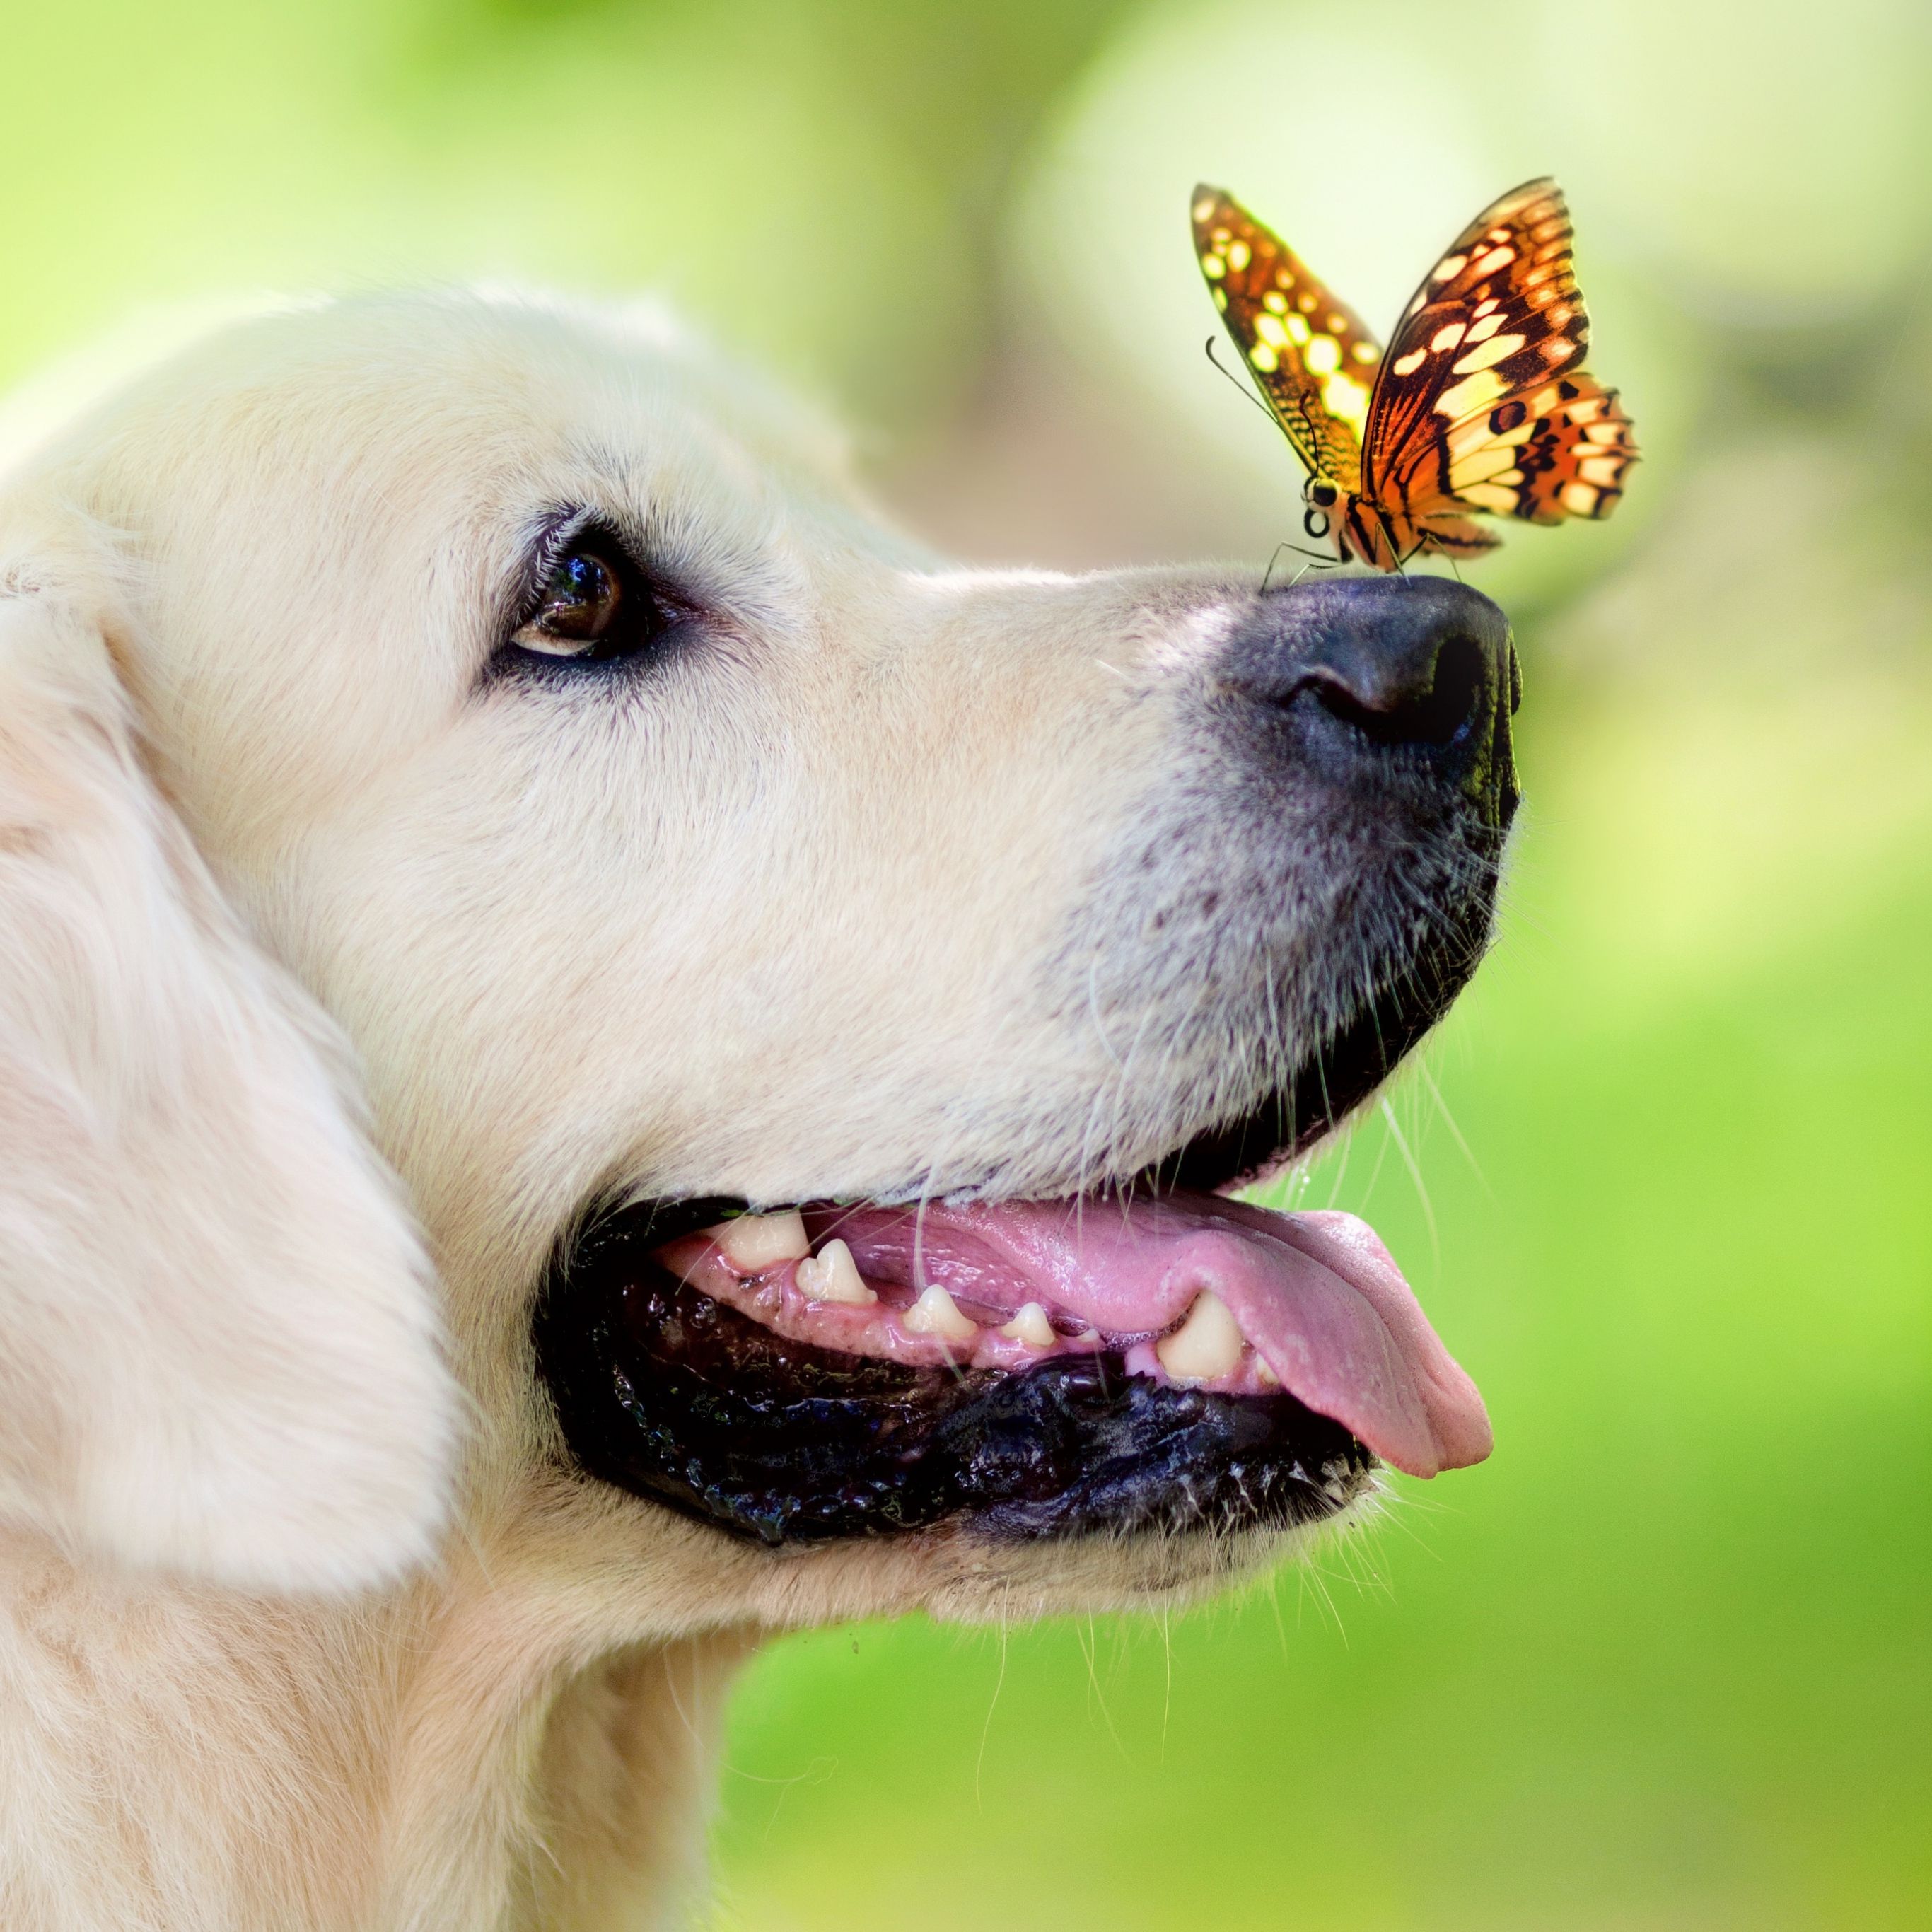 Dog and Butterfly Wallpaper